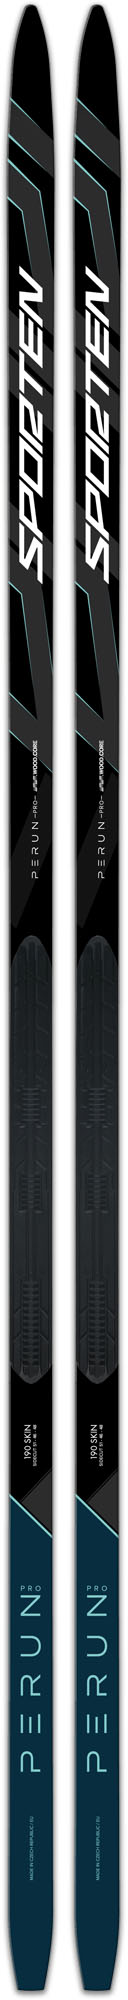 Classic style Nordic skis with skins